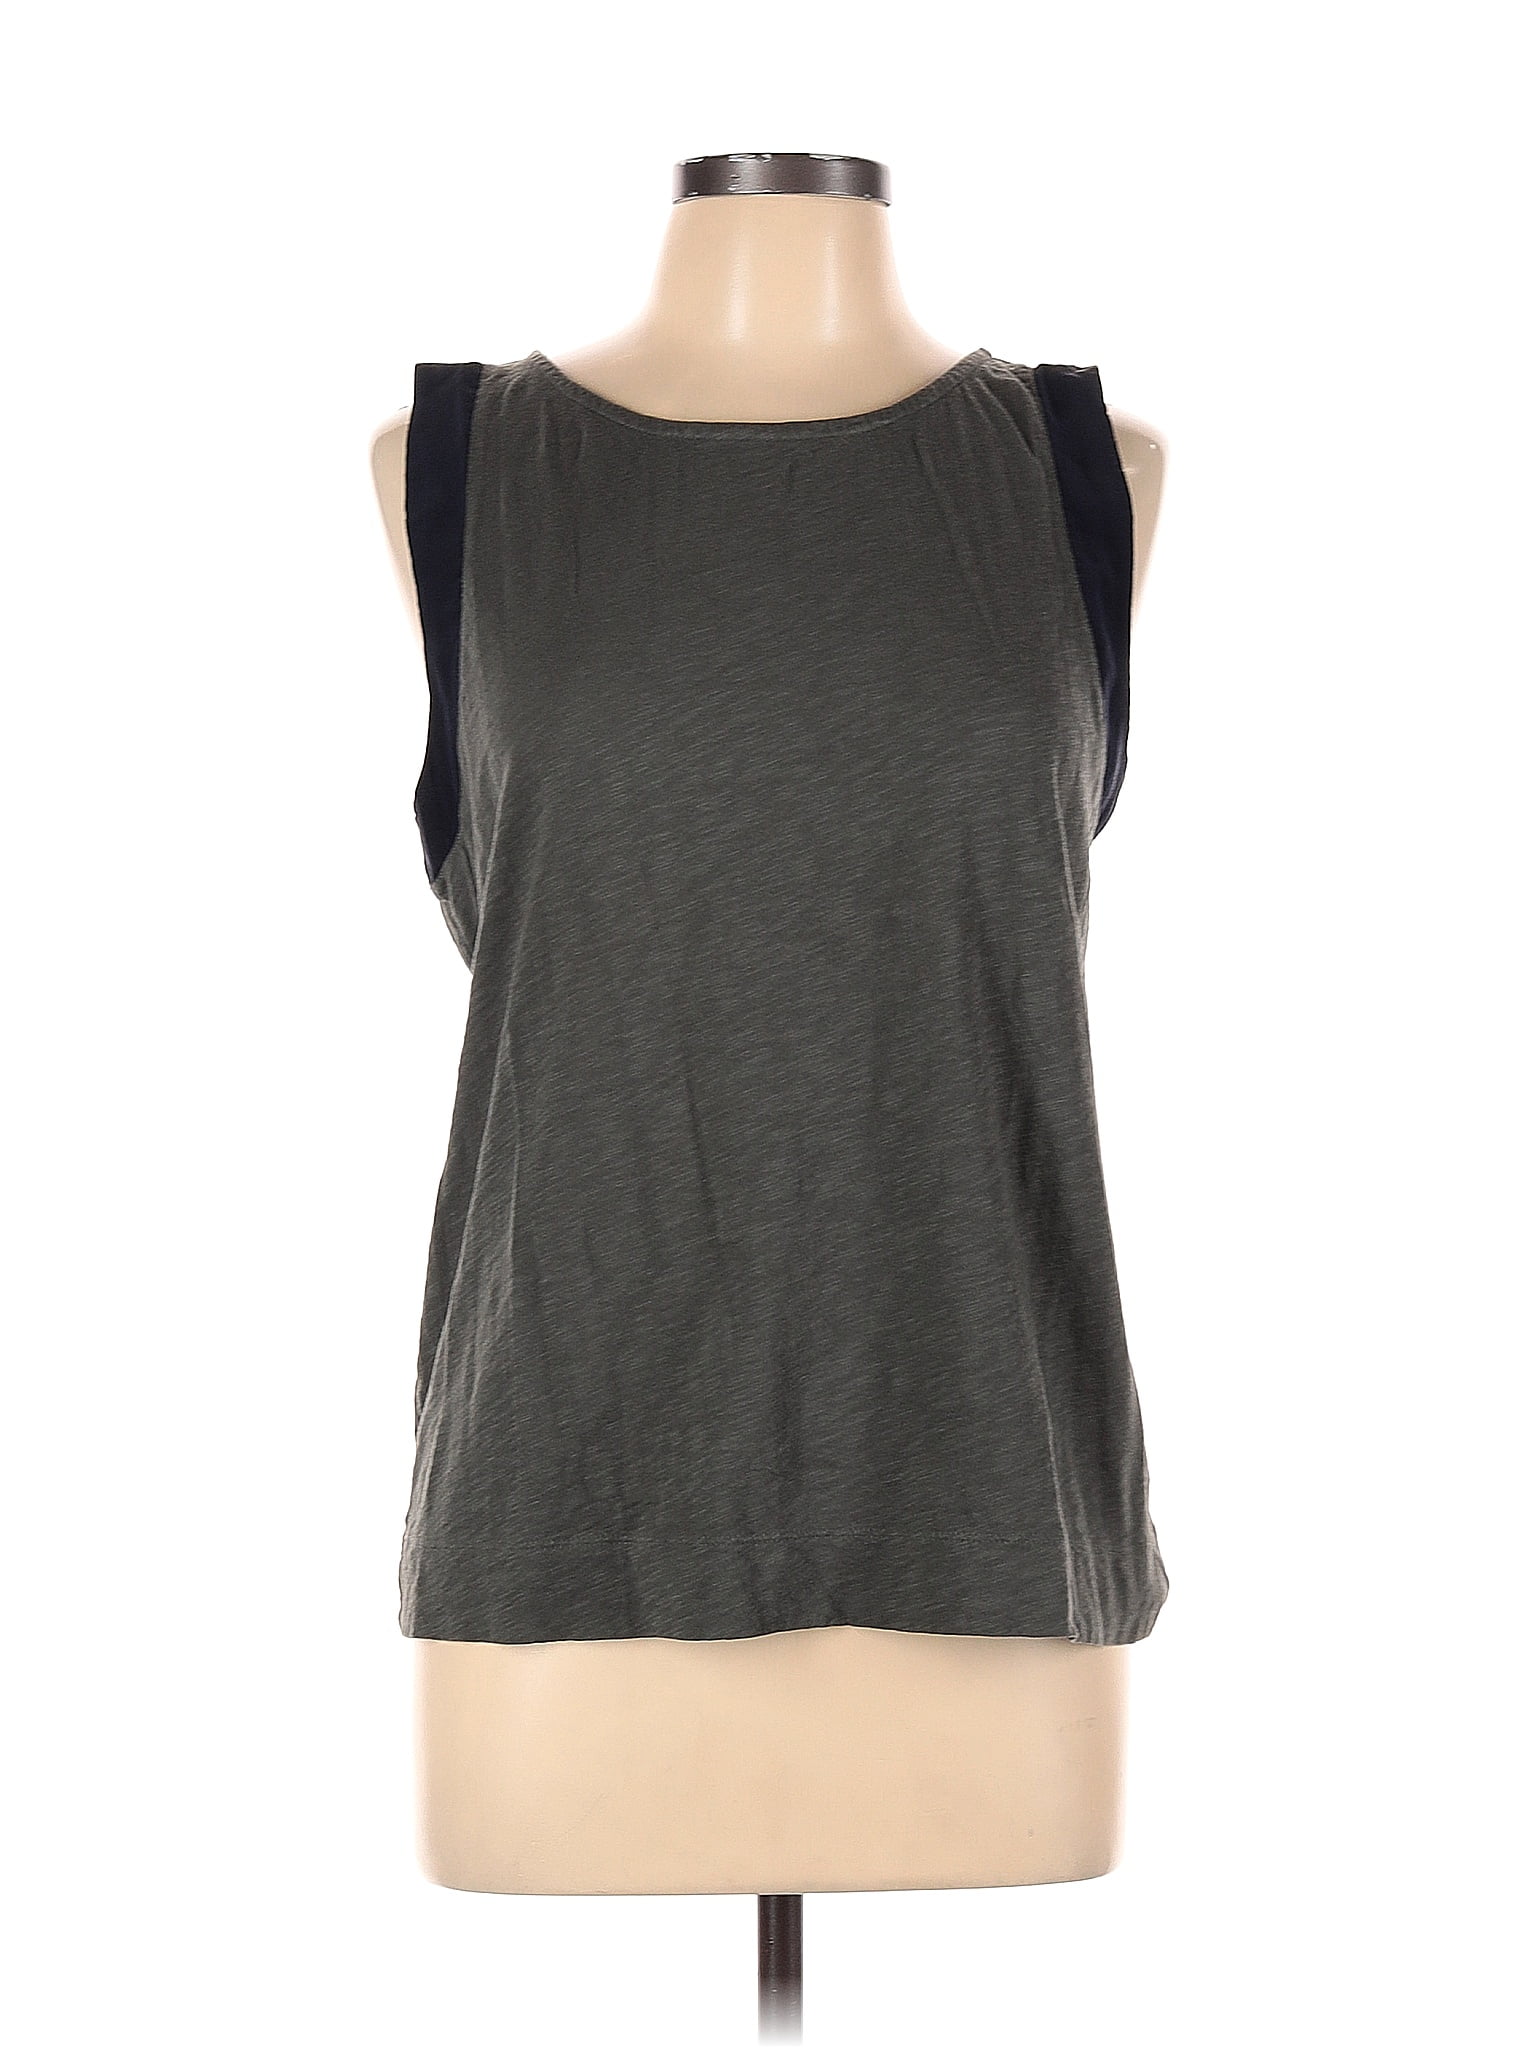 J.Crew 100% Cotton Solid Color Block Graphic Green Gray Sleeveless Top ...